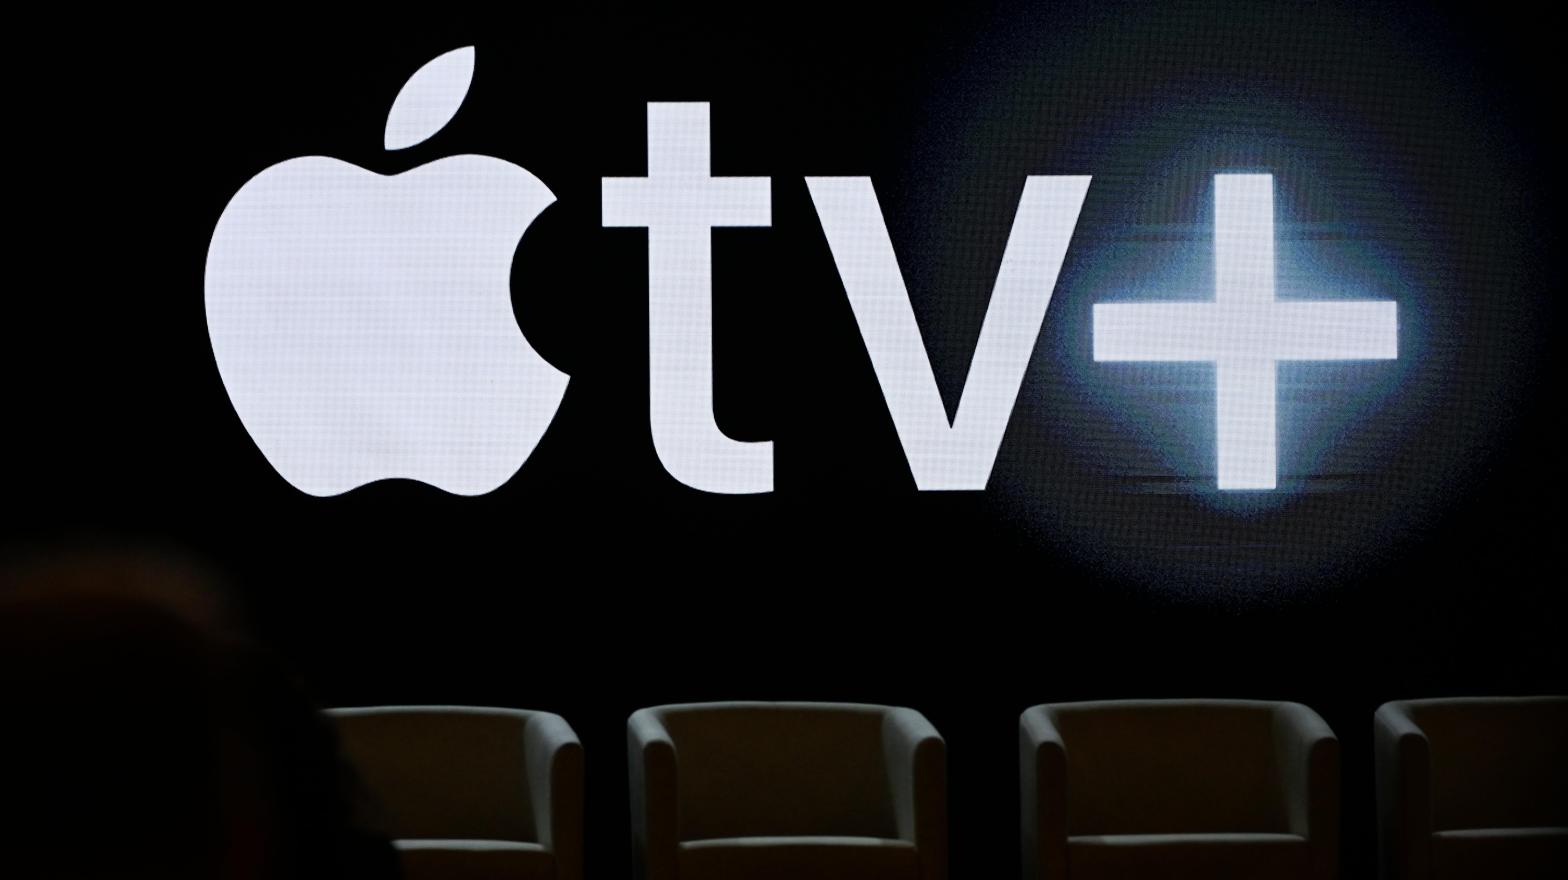 AppleTV+ Wants to Pay Actors Based on How Many People Watch Their Movies